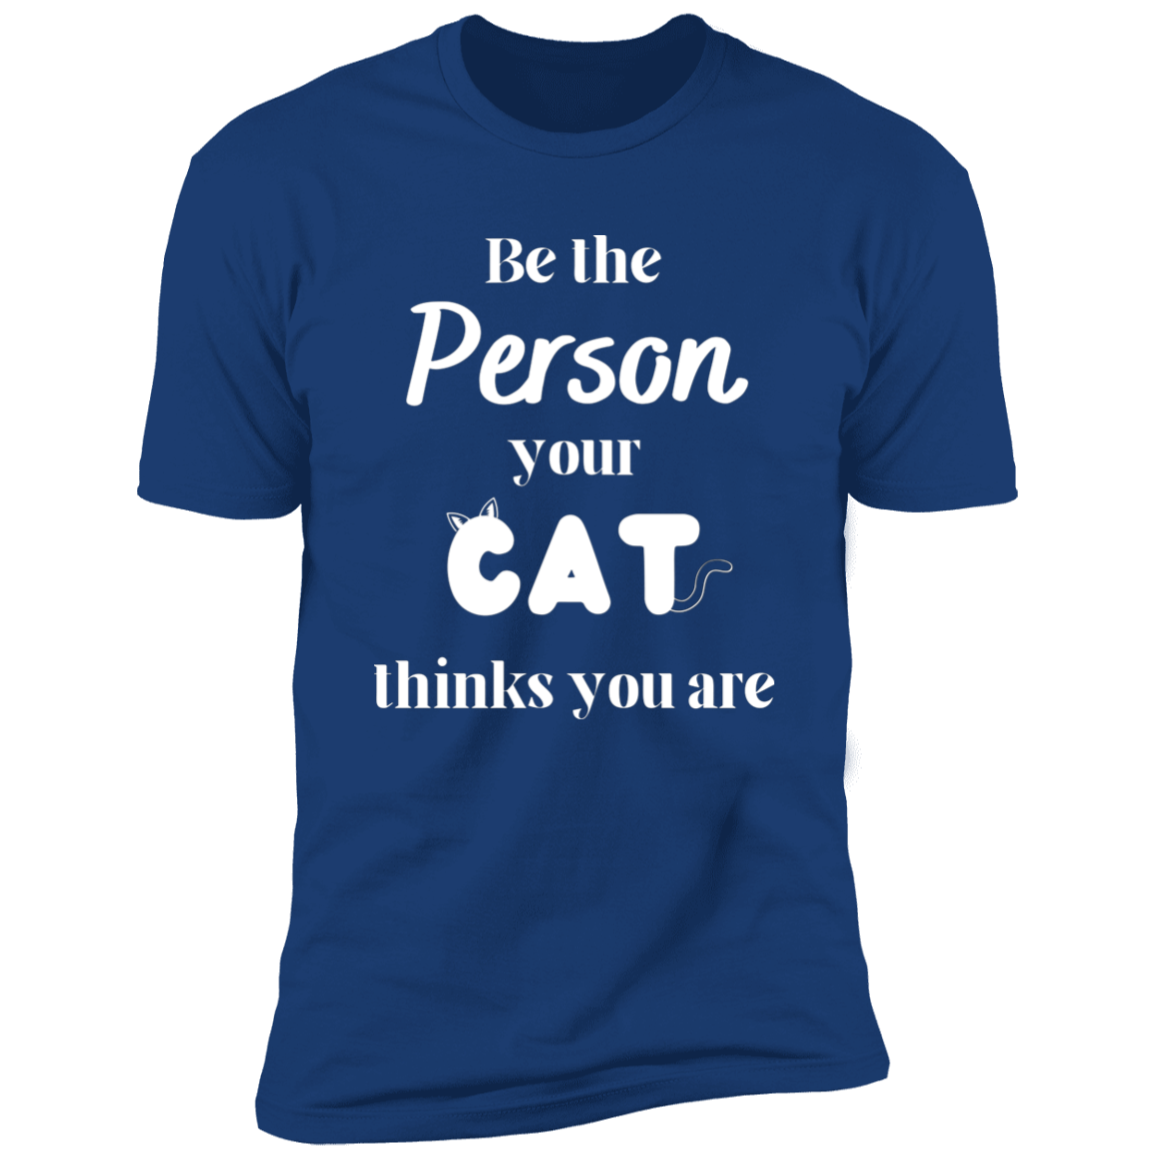 Be the Person Your Cat Thinks You Are T-shirt, Cat Shirt for humans, in royal blue